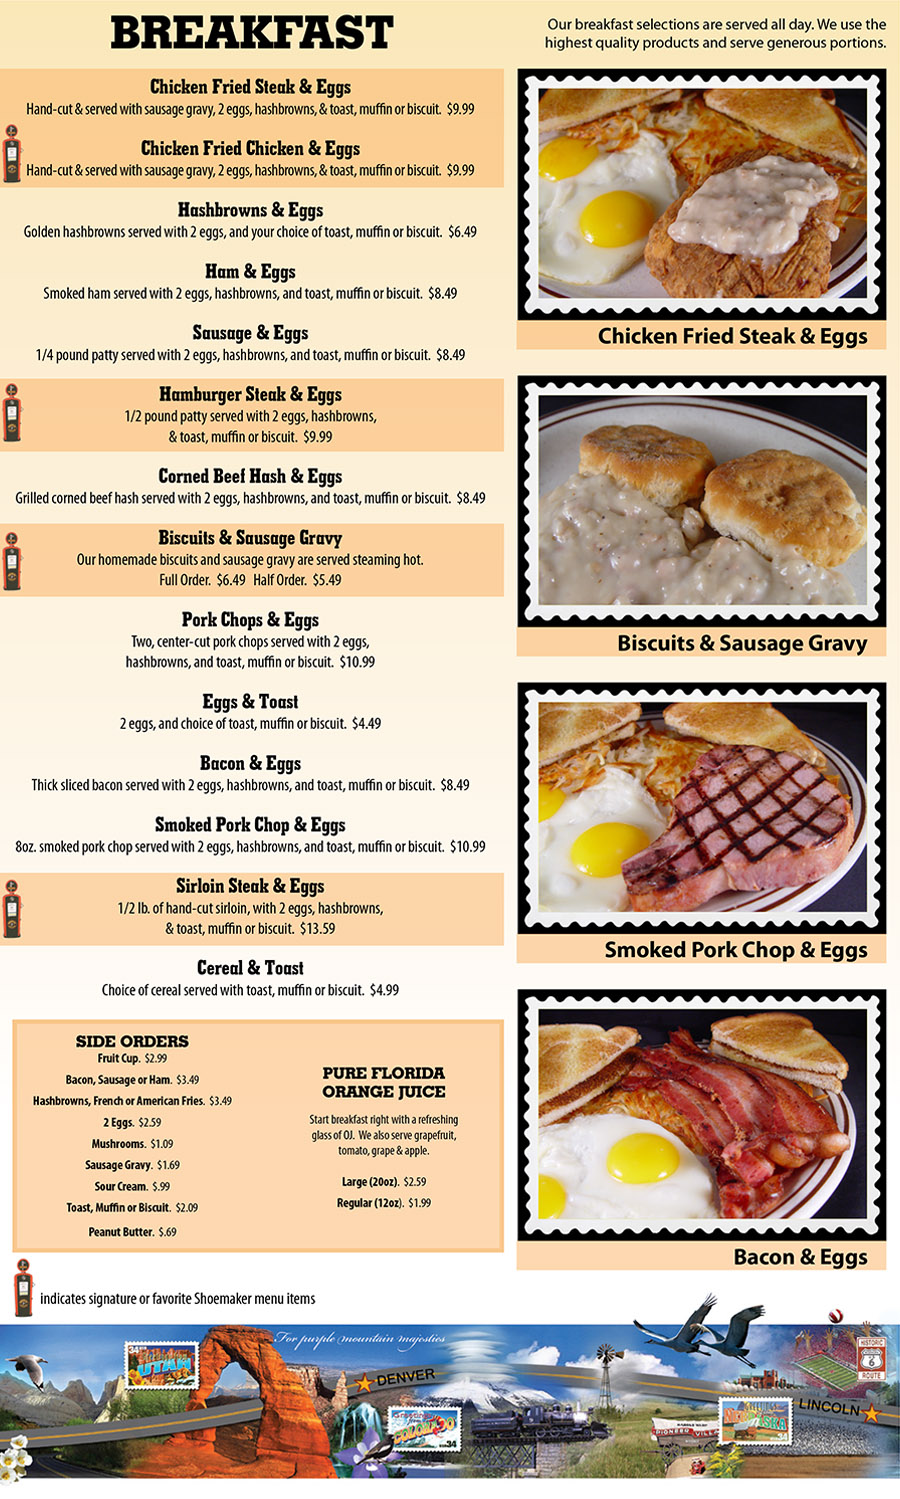 Shoemakers Travel Center Menu - Lincoln Nebraska
BREAKFAST
Our breakfast selections are served all day. We use the
highest quality products and serve generous portions.
BREAKFAST
Our breakfast selections are served all day. We use the
highest quality products and serve generous portions.
SIDE ORDERS
Fruit Cup.  $2.99
Bacon, Sausage or Ham.  $3.49
Hashbrowns, French or American Fries.  $3.49
2 Eggs.  $2.59
Mushrooms.  $1.09
Sausage Gravy.  $1.69
Sour Cream.  $.99
Toast, Muffin or Biscuit.  $2.09
Peanut Butter.  $.69
PURE FLORIDA
ORANGE JUICE
Start breakfast right with a refreshing 
glass of OJ.  We also serve grapefruit, 
tomato, grape & apple.
Large (20oz).  $2.59
Regular (12oz).  $1.99

